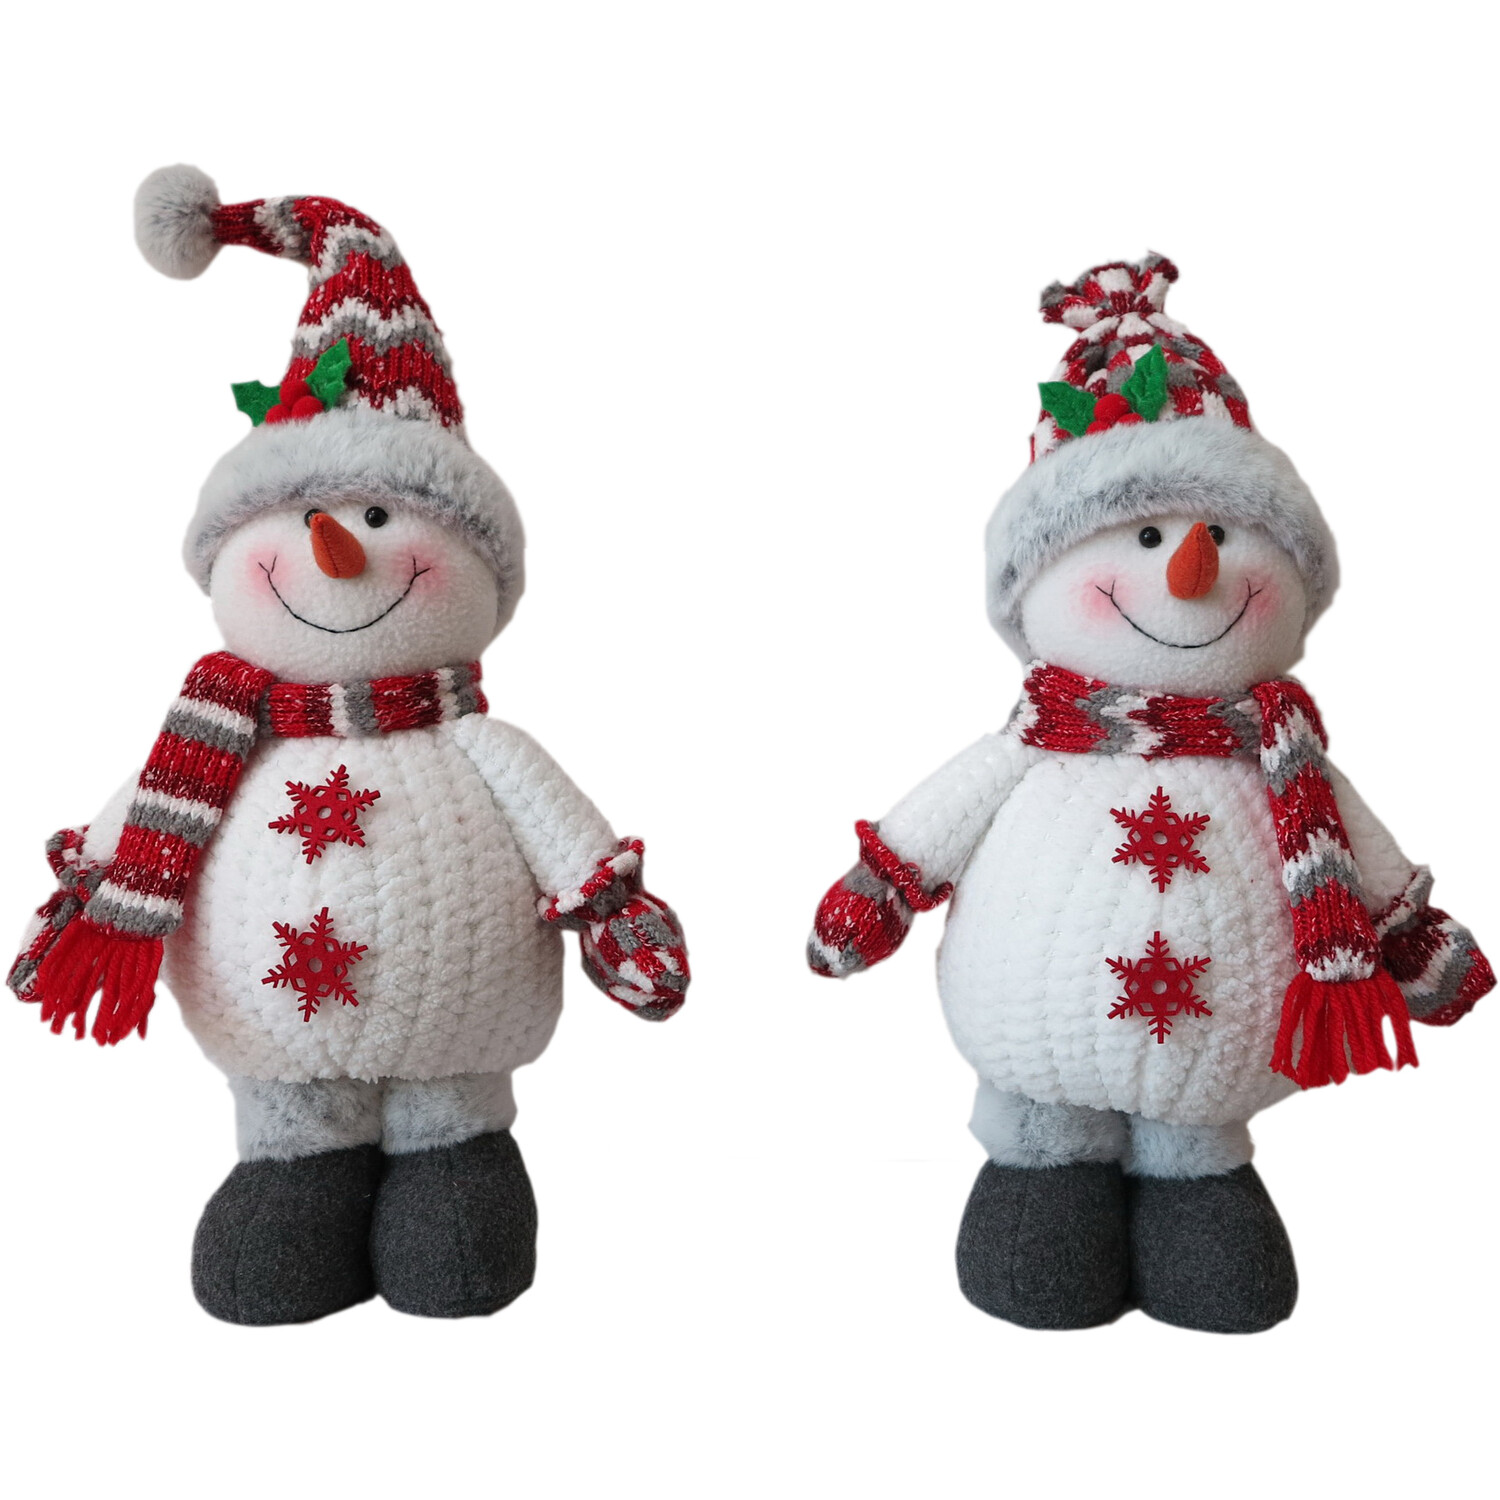 White Standing Snowman Christmas Ornament Image